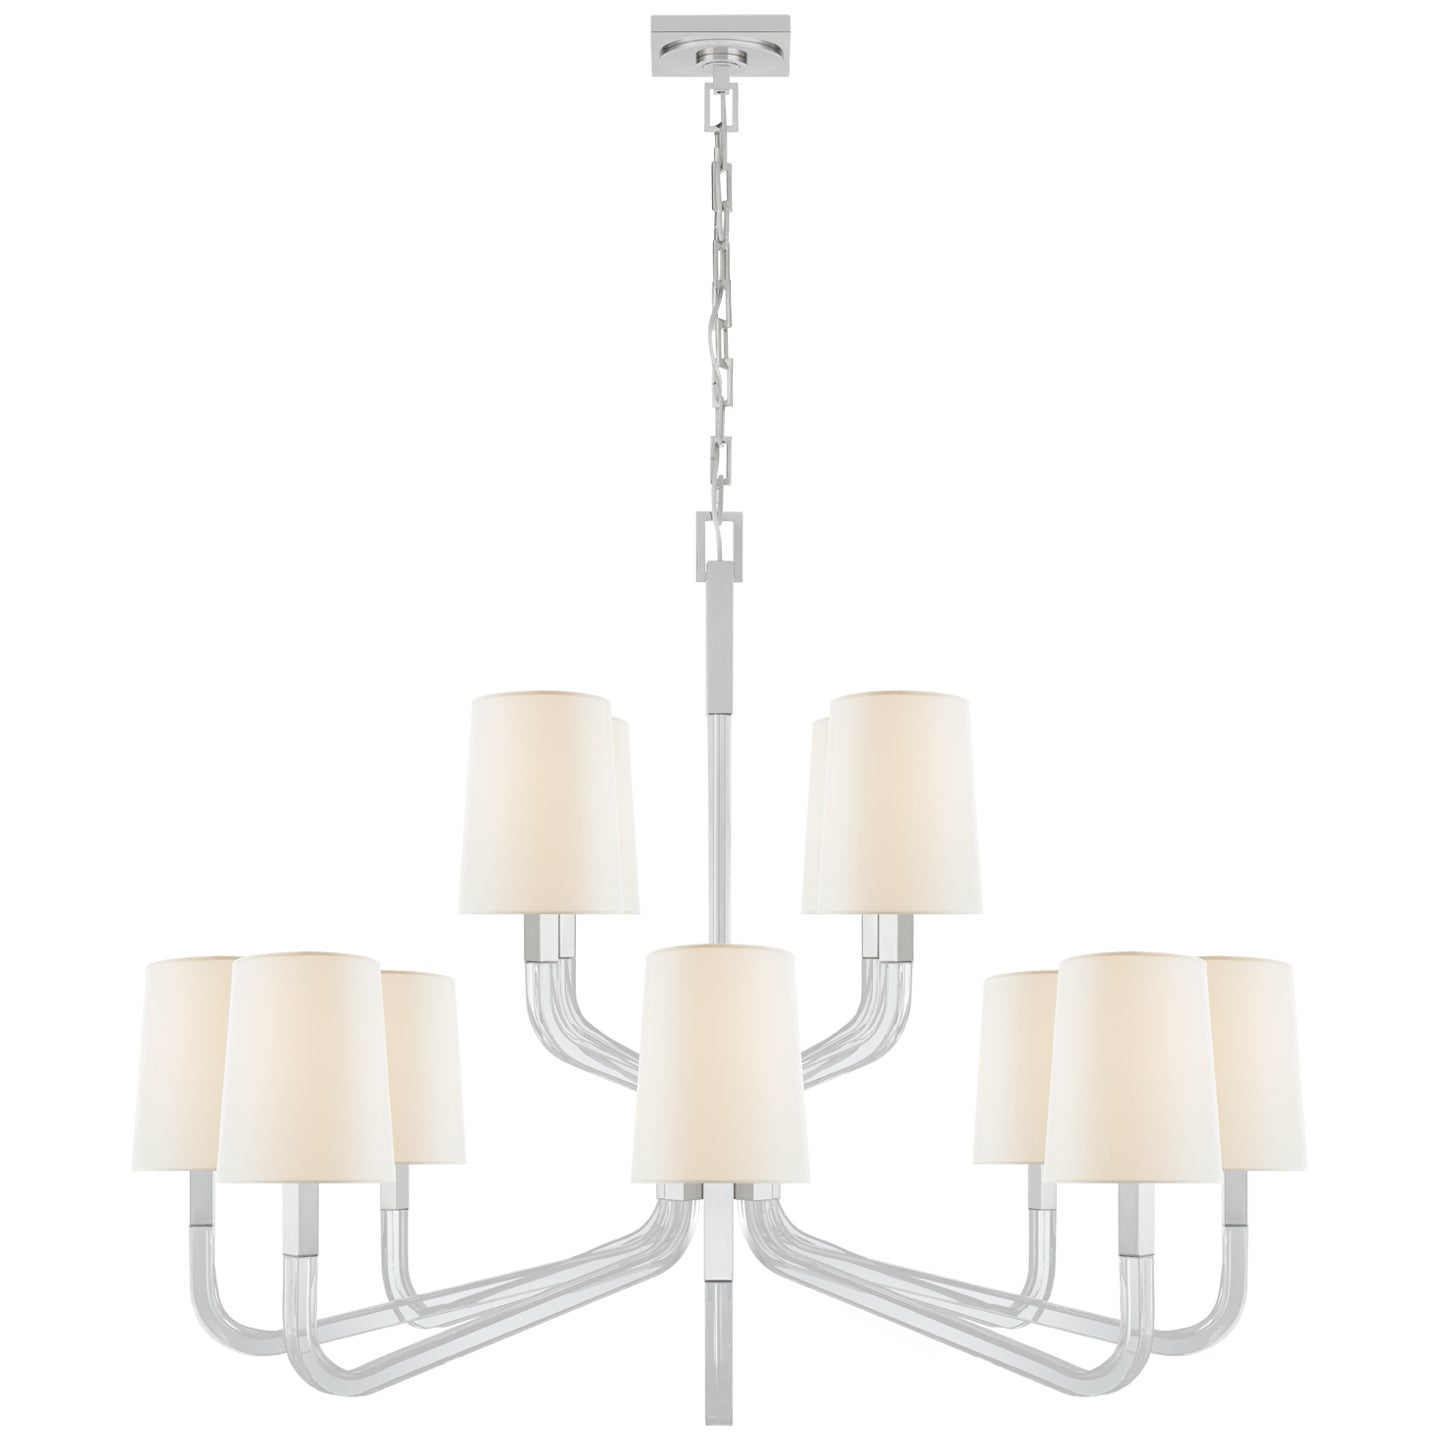 Visual Comfort Signature - CHC 5904PN/CG-L - 12 Light Chandelier - Reagan - Polished Nickel and Crystal